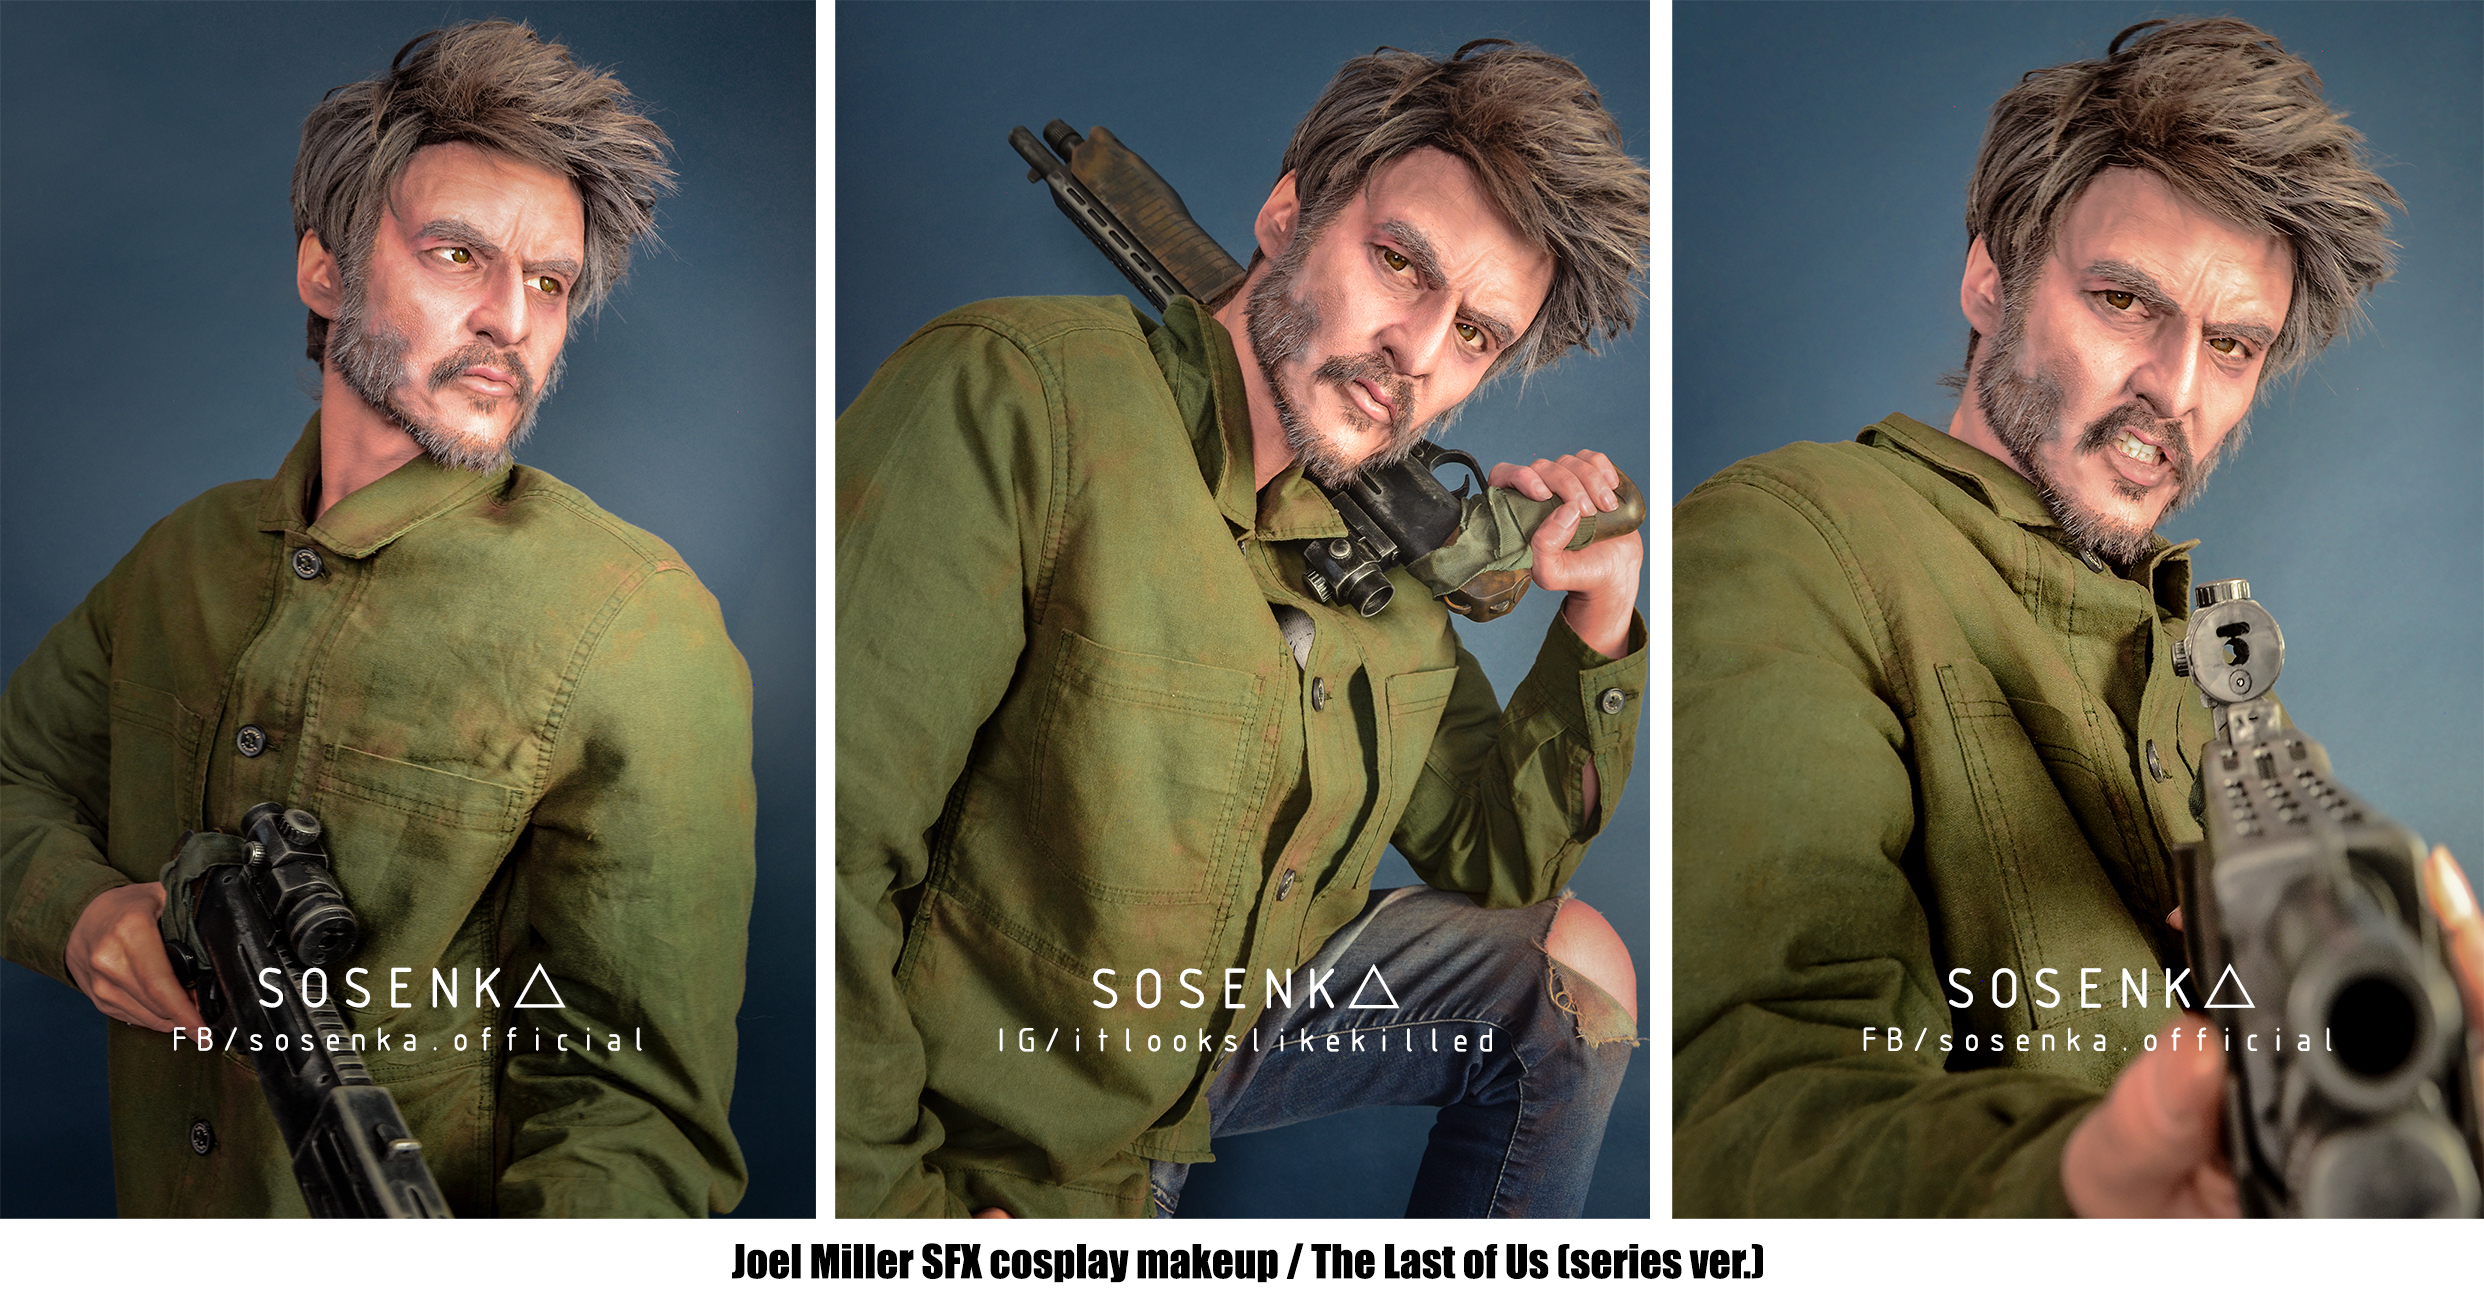 2023 - The Last of Us - Joel Miller - Pedro Pascal #pedropascal in 2023